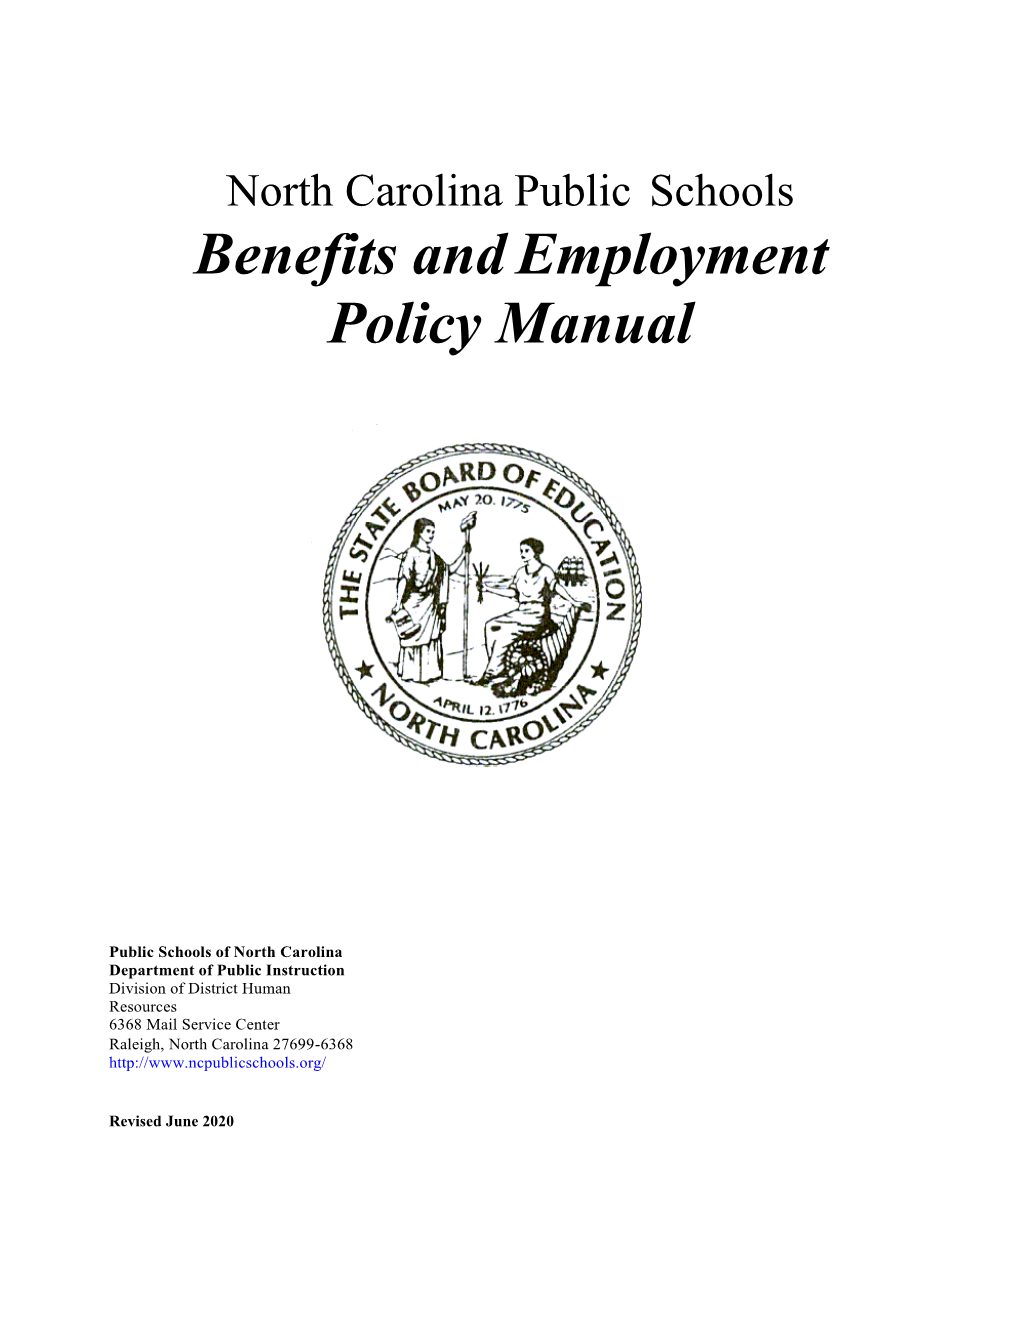 Benefits and Employment Policy Manual